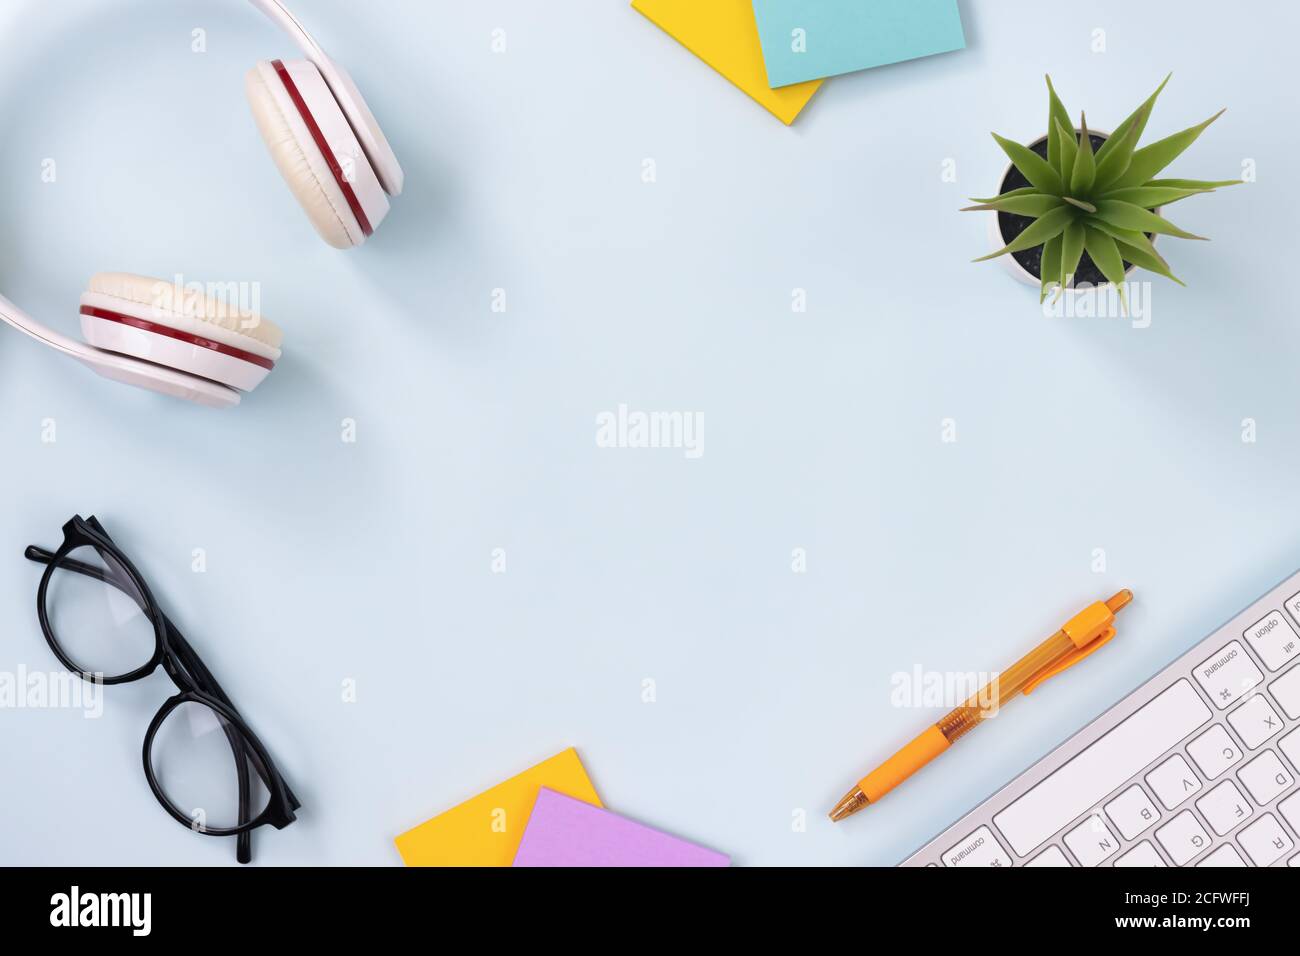 Modern Clean Creative Office Desk or Table on Top View or Flat Lay and Stationery as Keyboard,Headphone,Pen,Sticky Note,Office Plants,Glasses Stock Photo